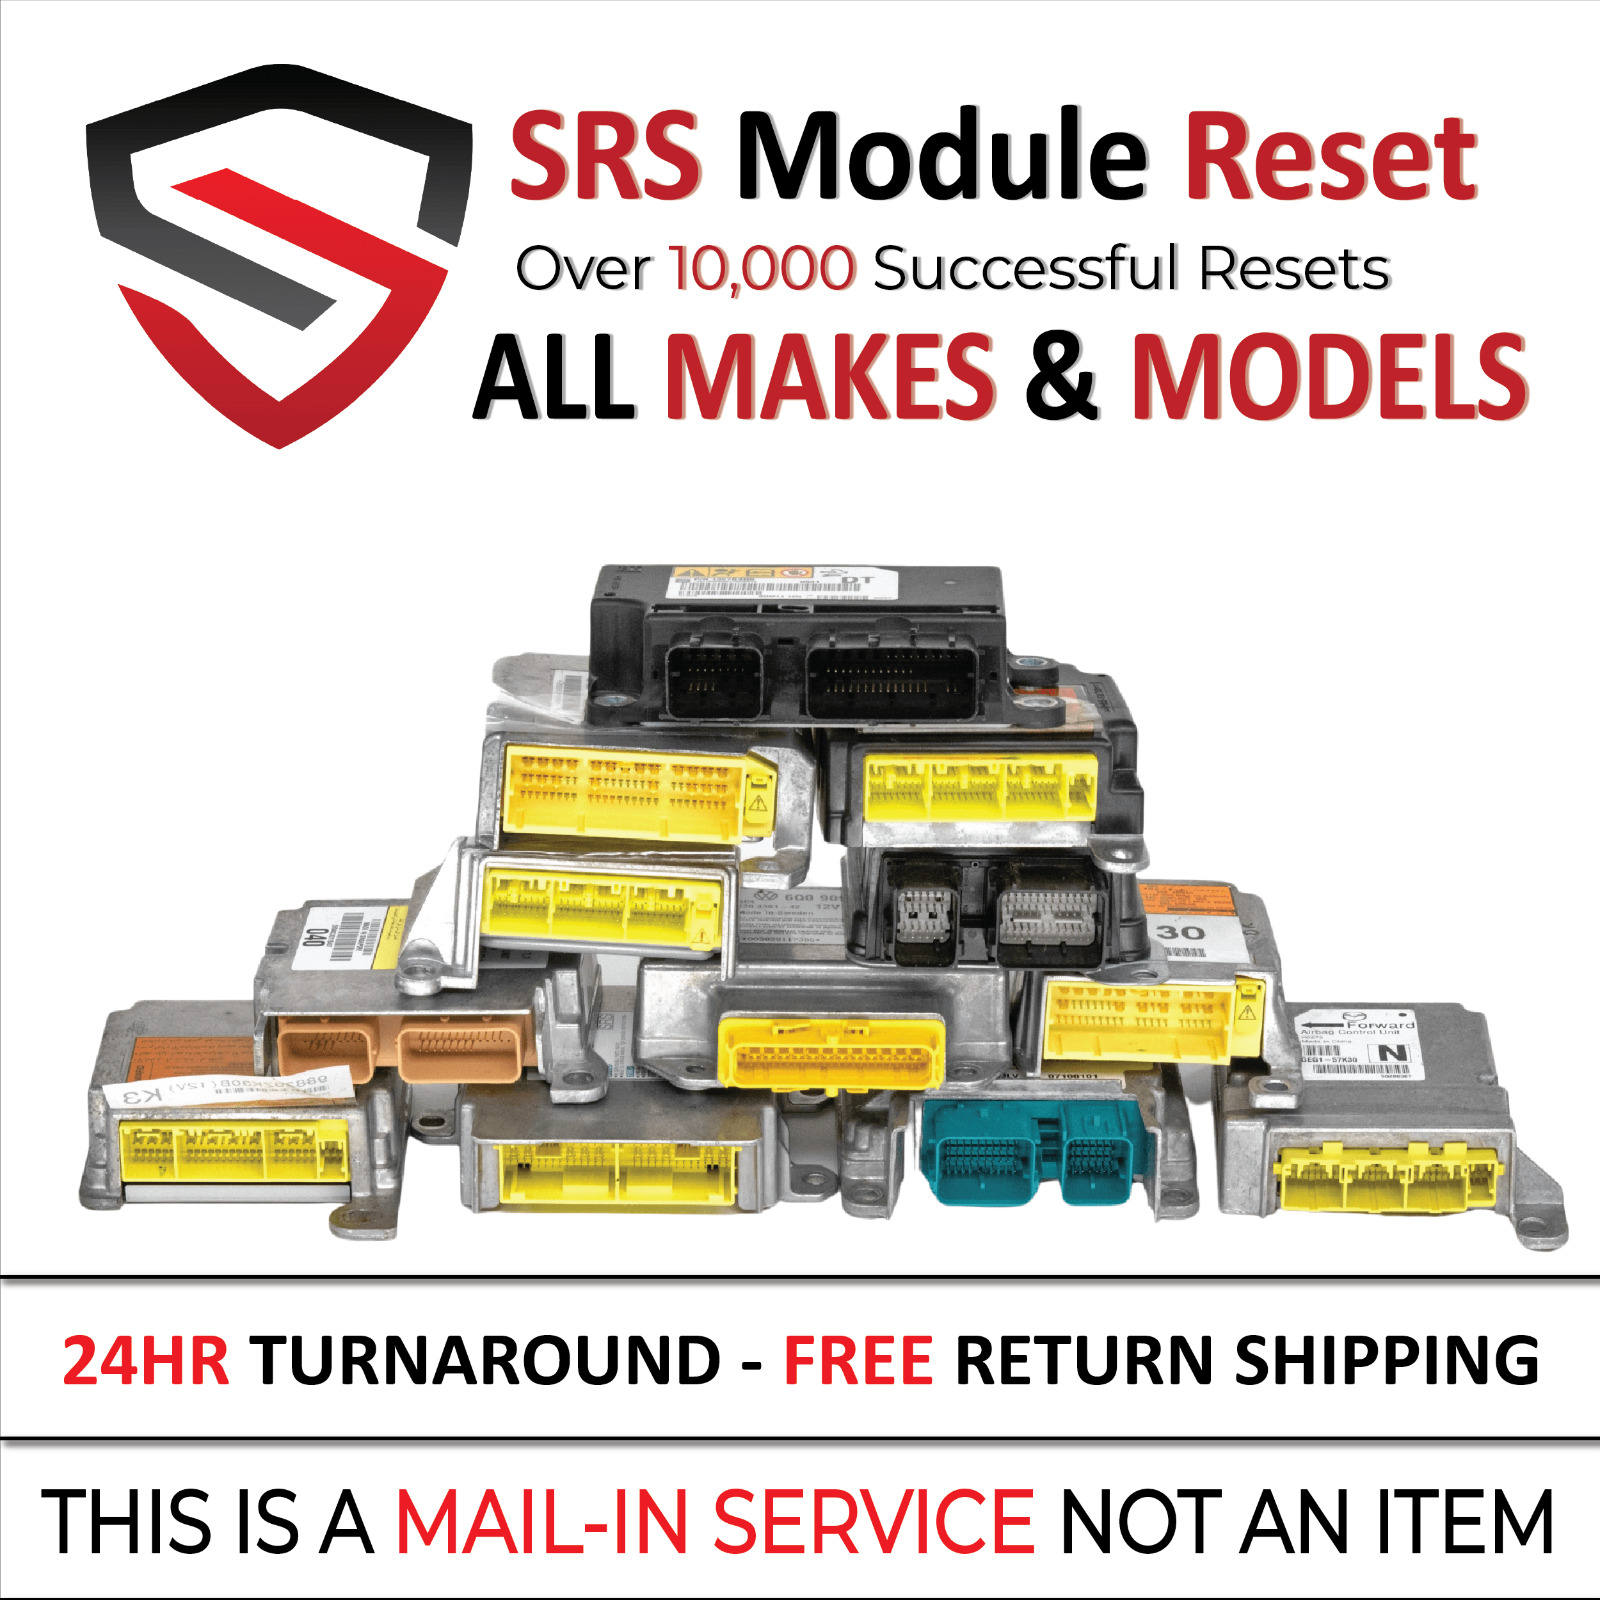 For Cadillac SRS Module Reset Service - Guaranteed or Your Money Back